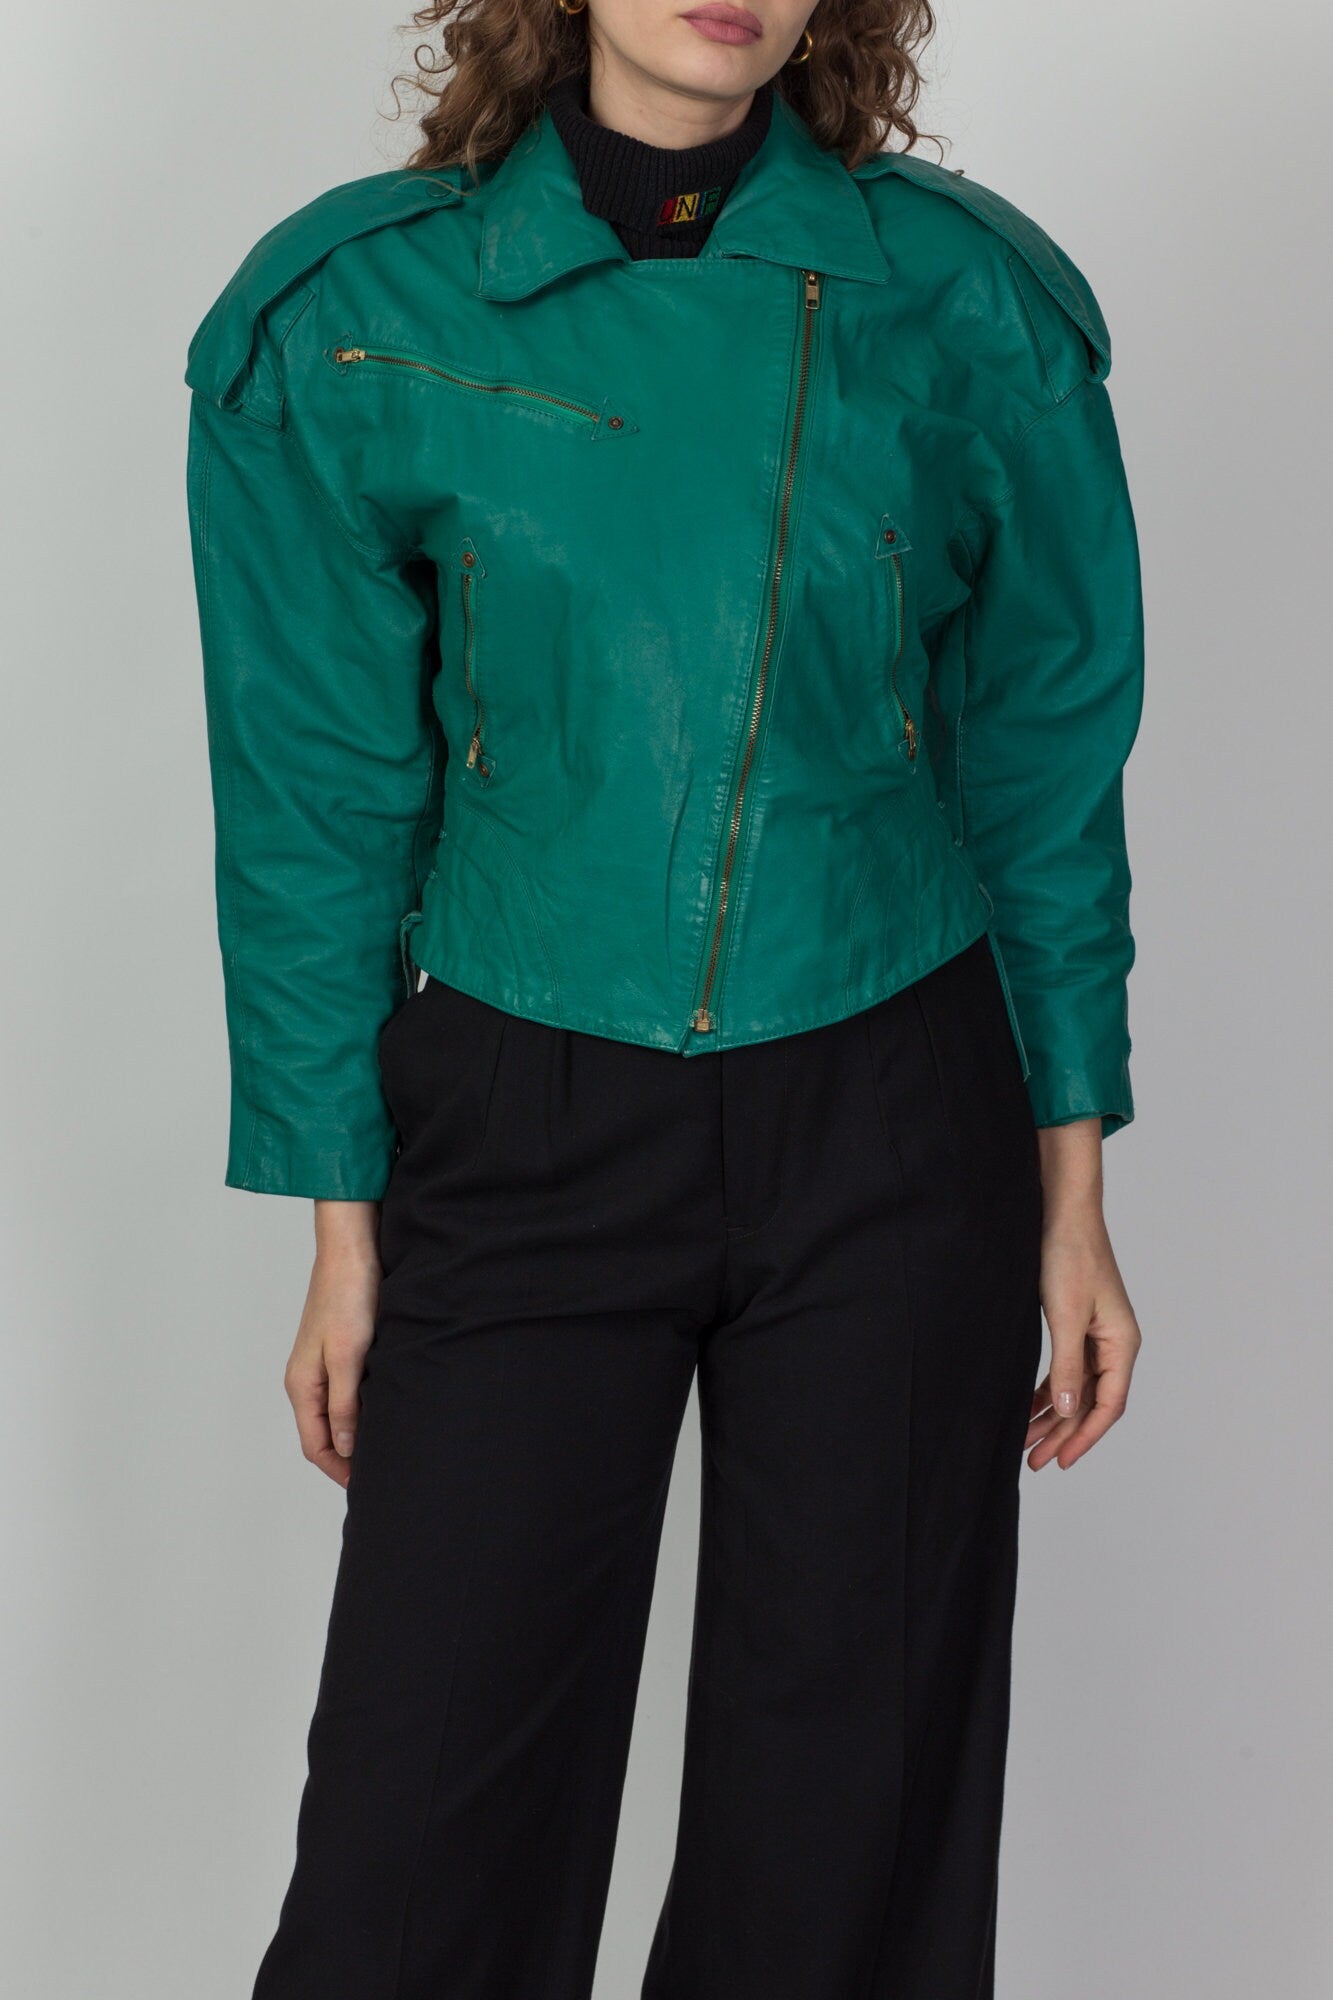 Vintage 80s Teal Green Leather Crop Jacket - Small 